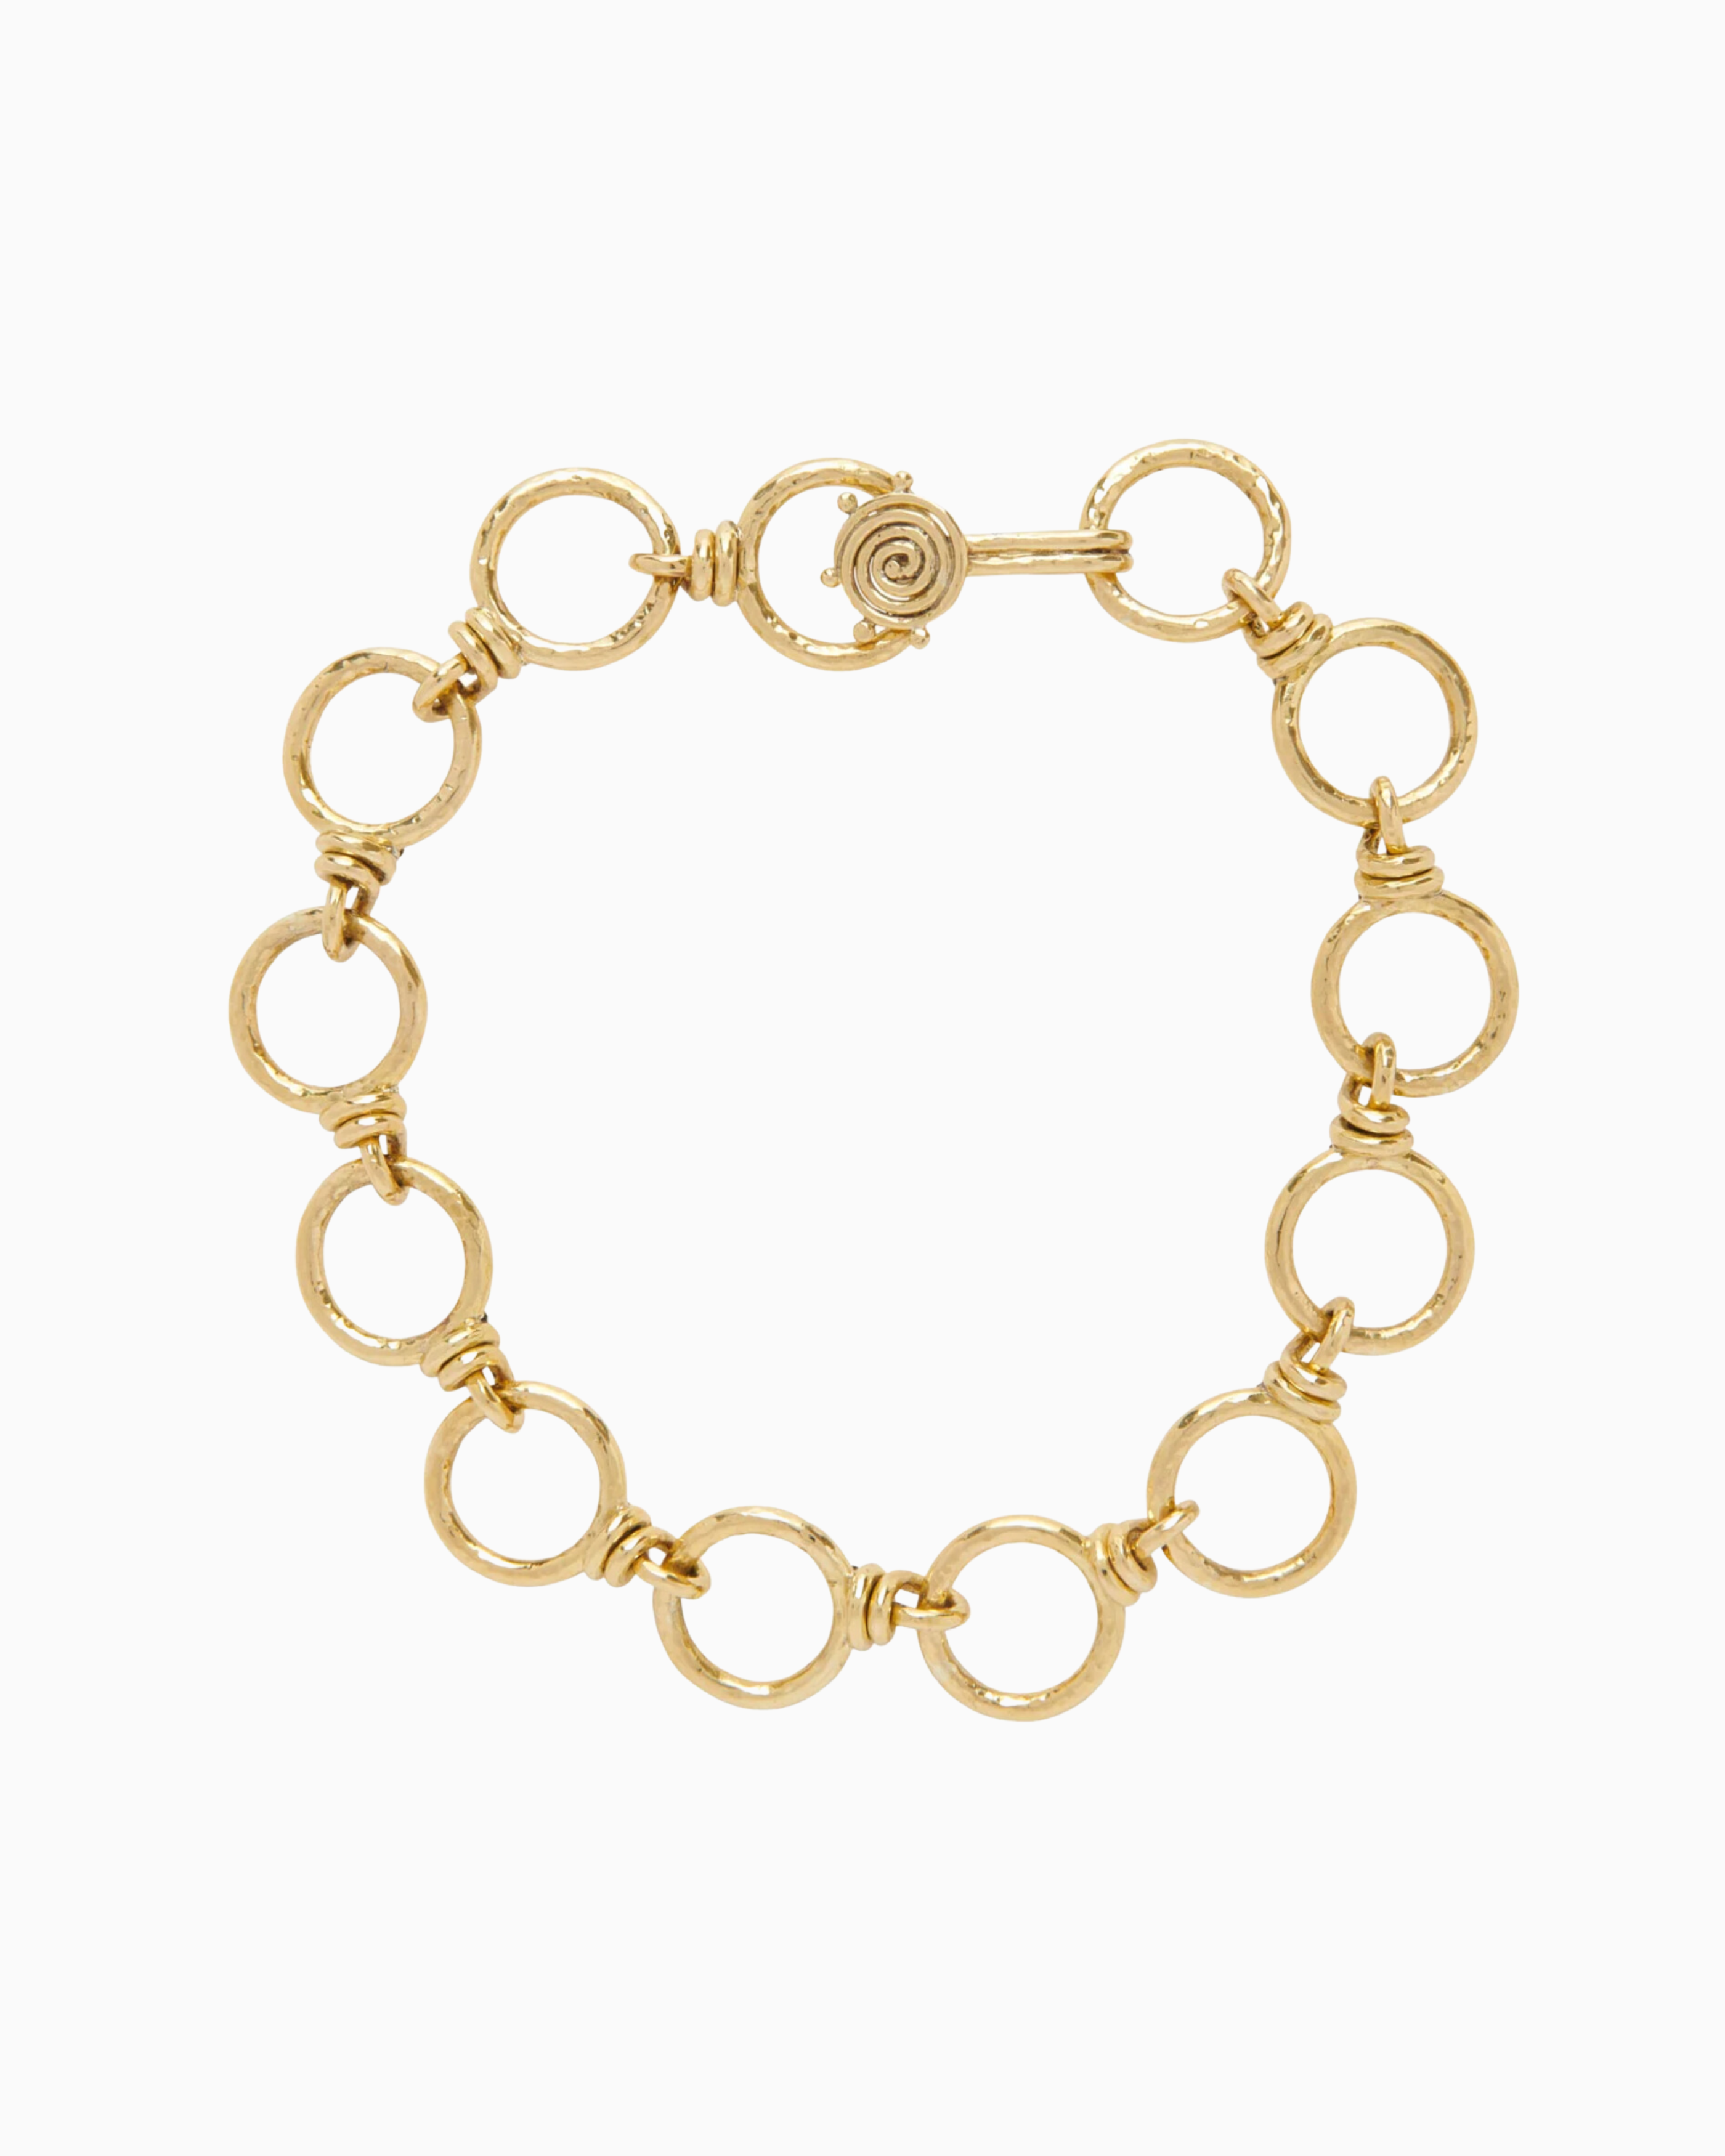 Ulla Johnson Hammered Circle Chain Necklace in Brass